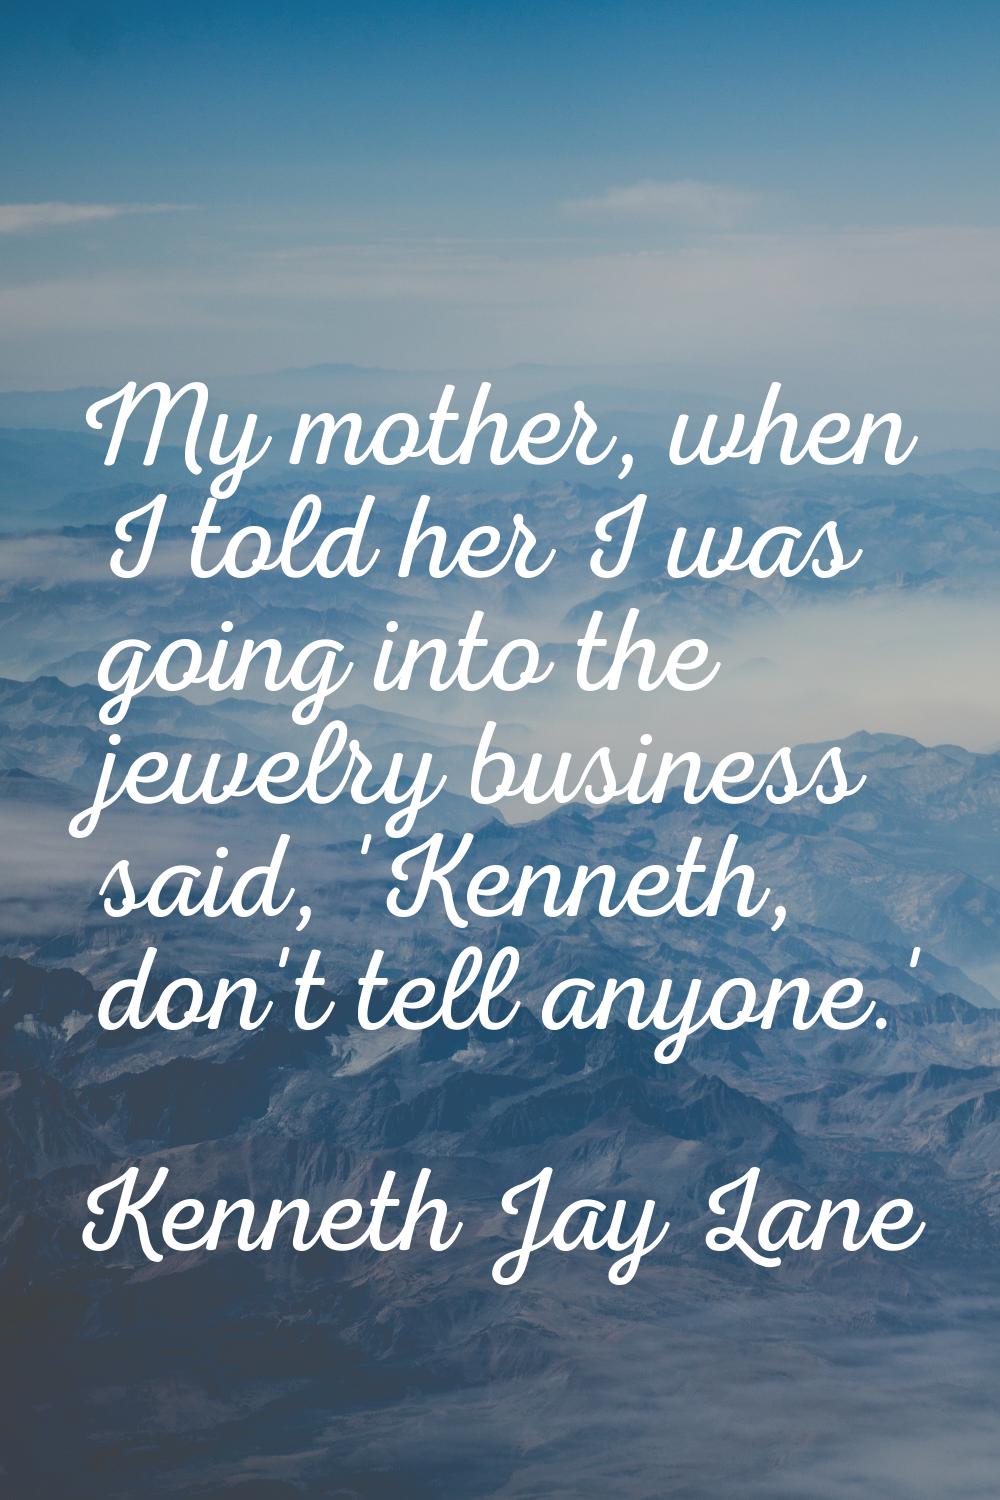 My mother, when I told her I was going into the jewelry business said, 'Kenneth, don't tell anyone.